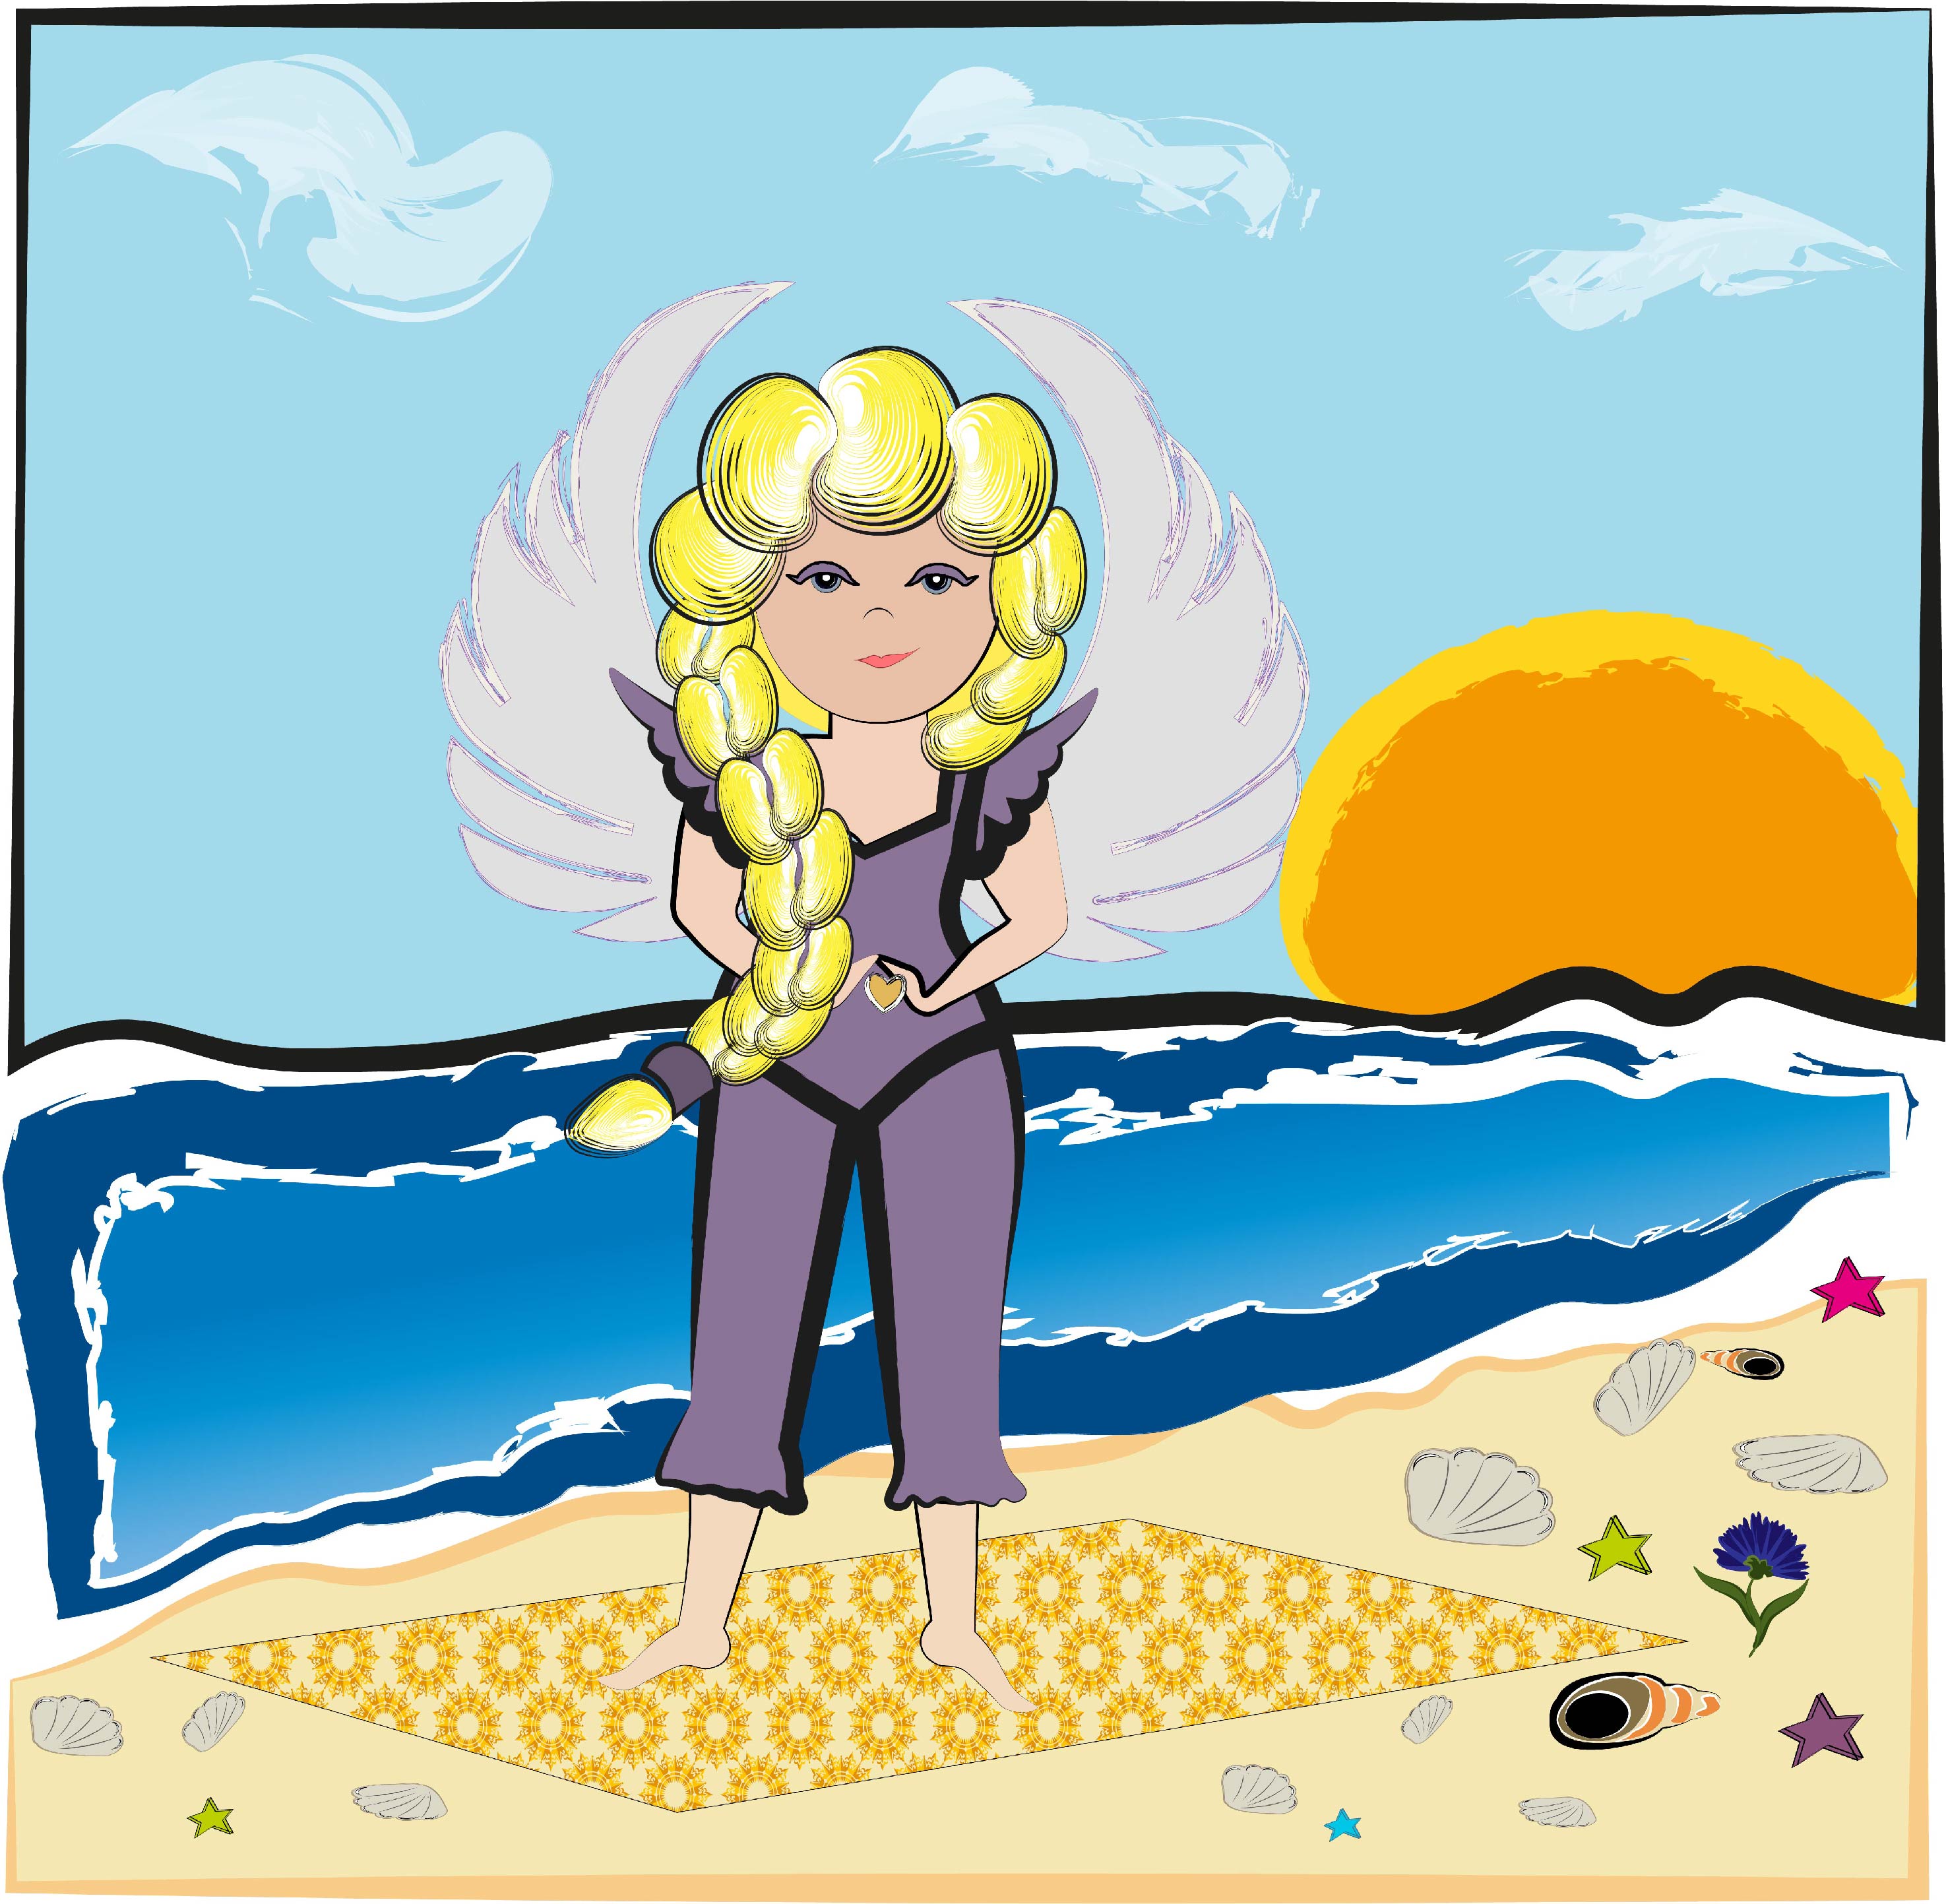 Cute Little Angel Character for Children's Fairy Tale, angel and sunset deign.